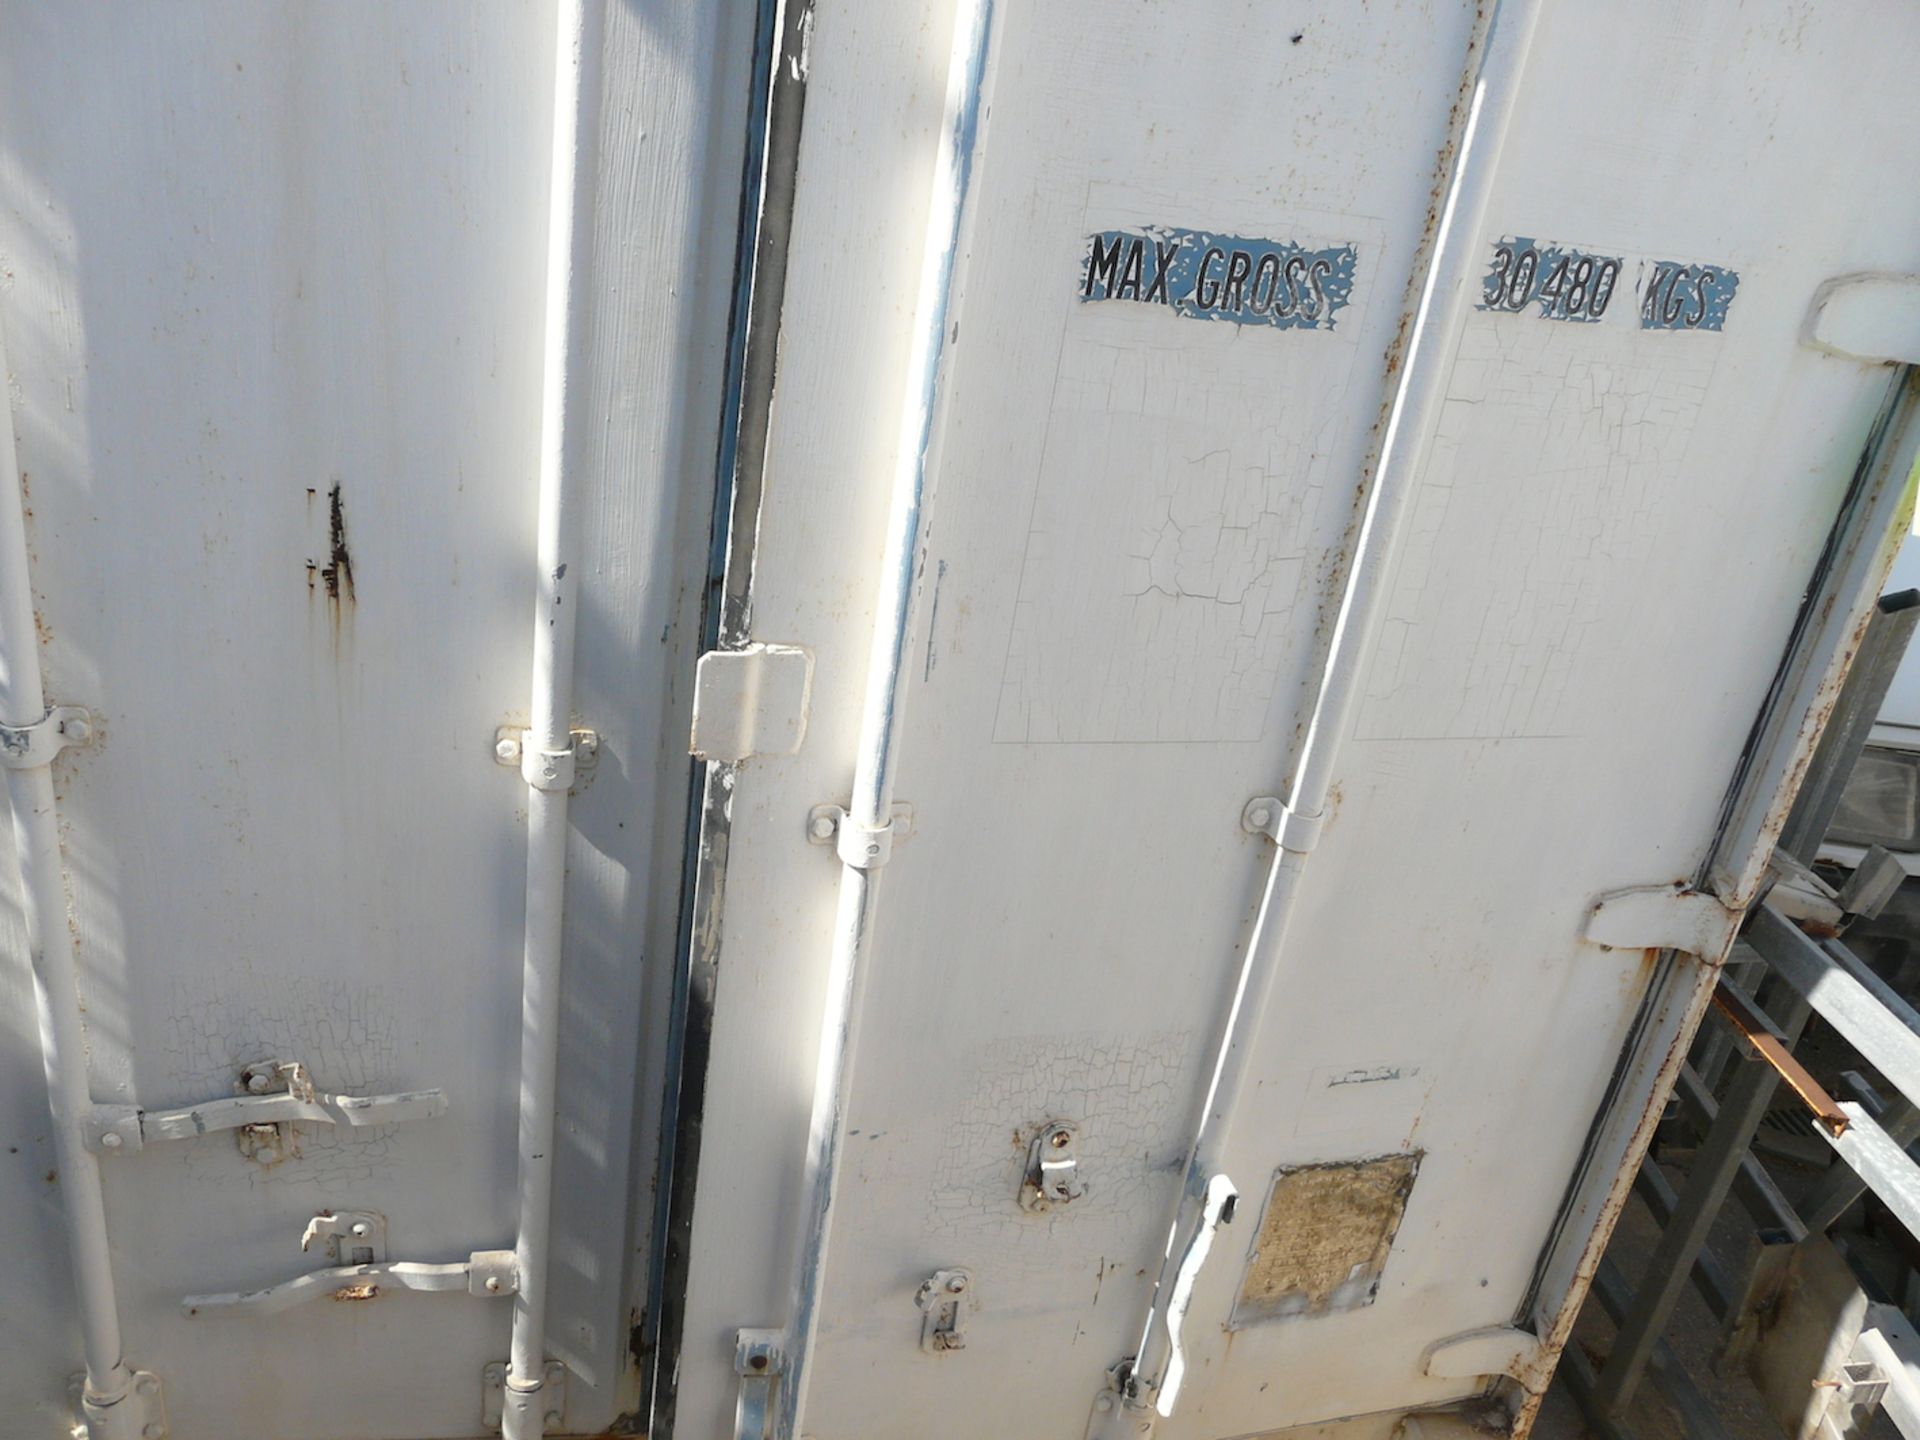 English: 40Ft Container with Contents Greek: Κοντέϊνερ 40” με το περιεχόμενο του - Image 6 of 8